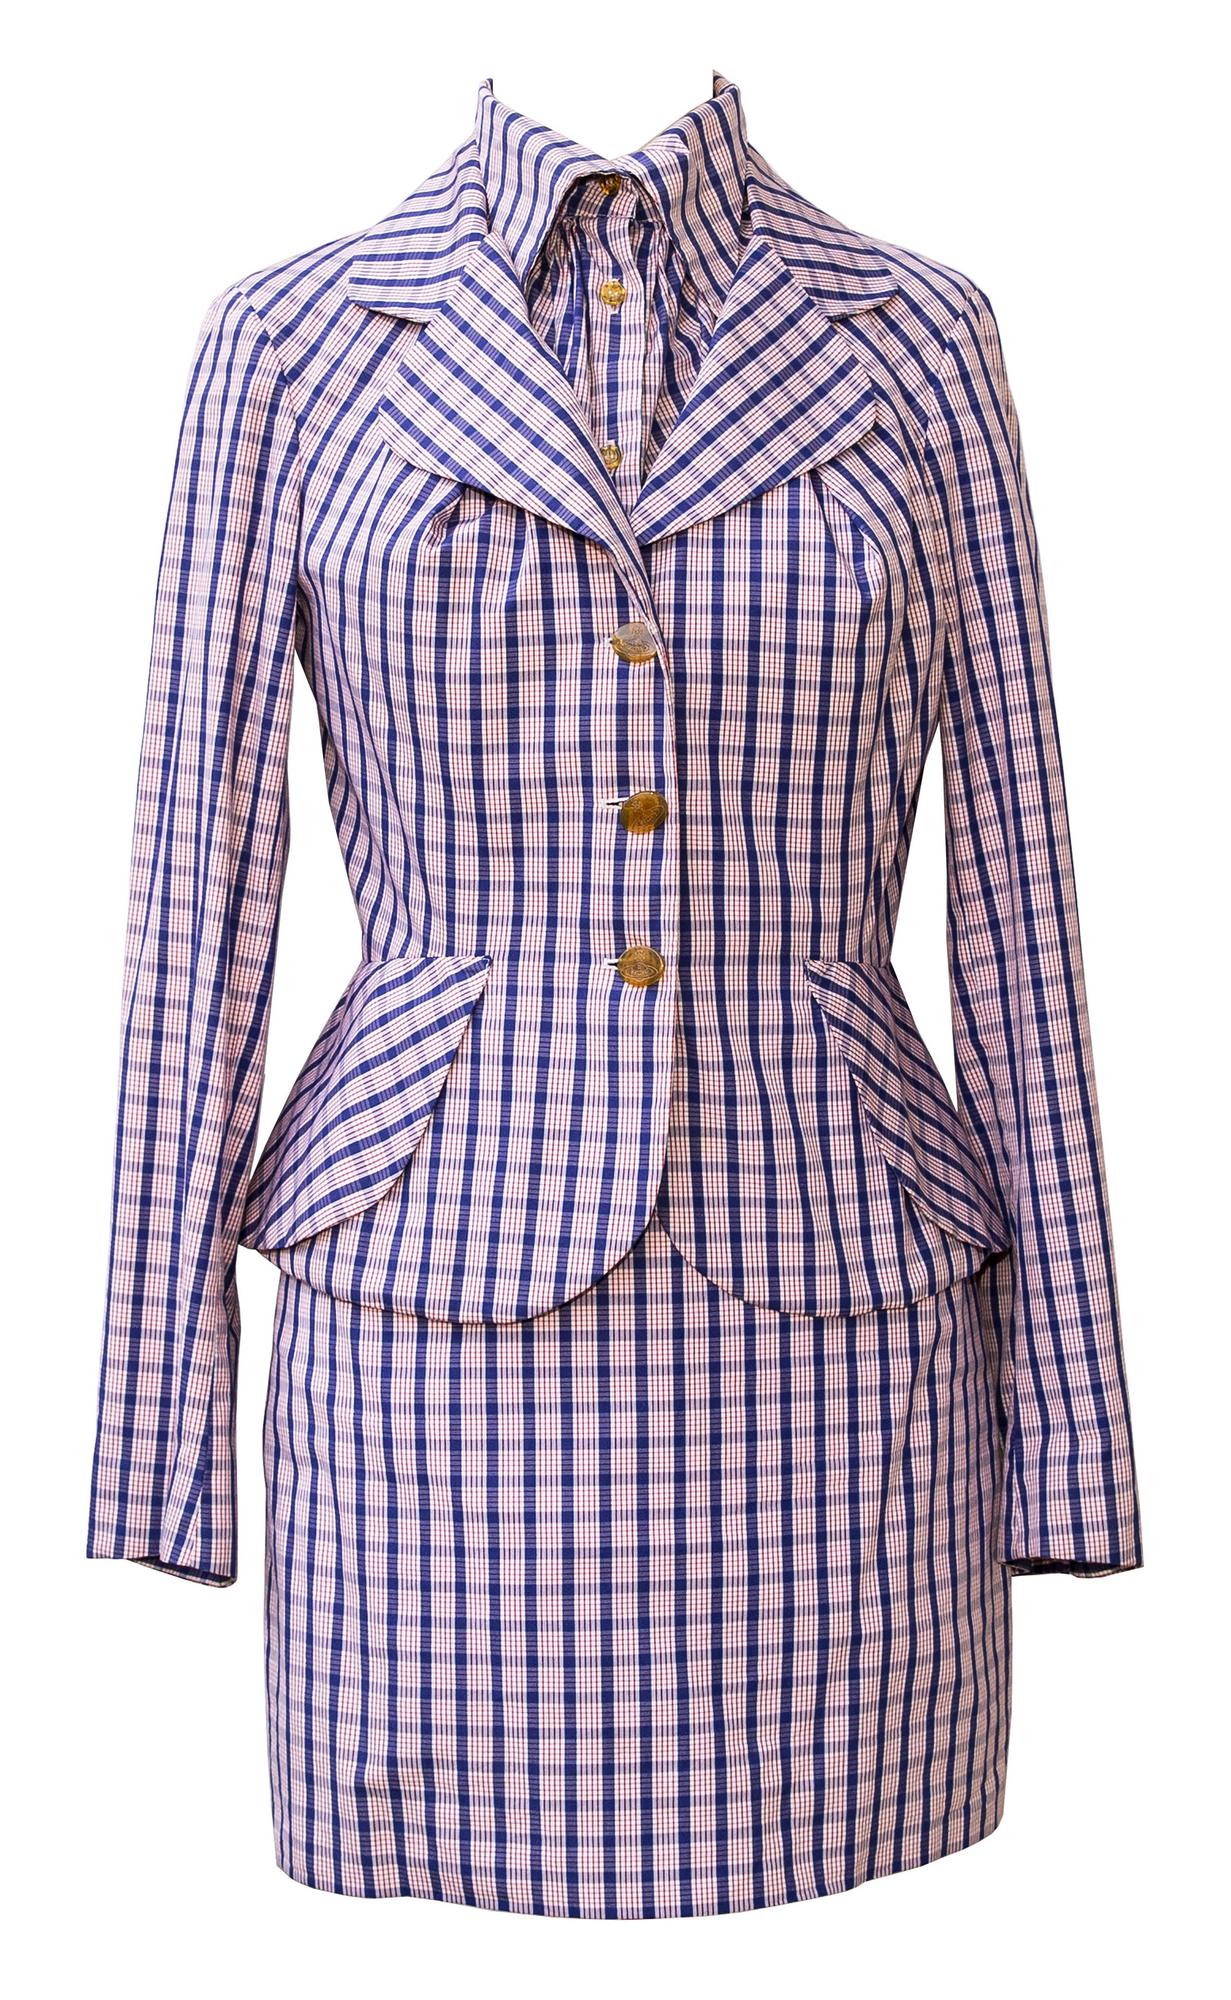 Vivienne Westwood BETTINA SHIRTING SUIT Description: Set made up of 3 items:...